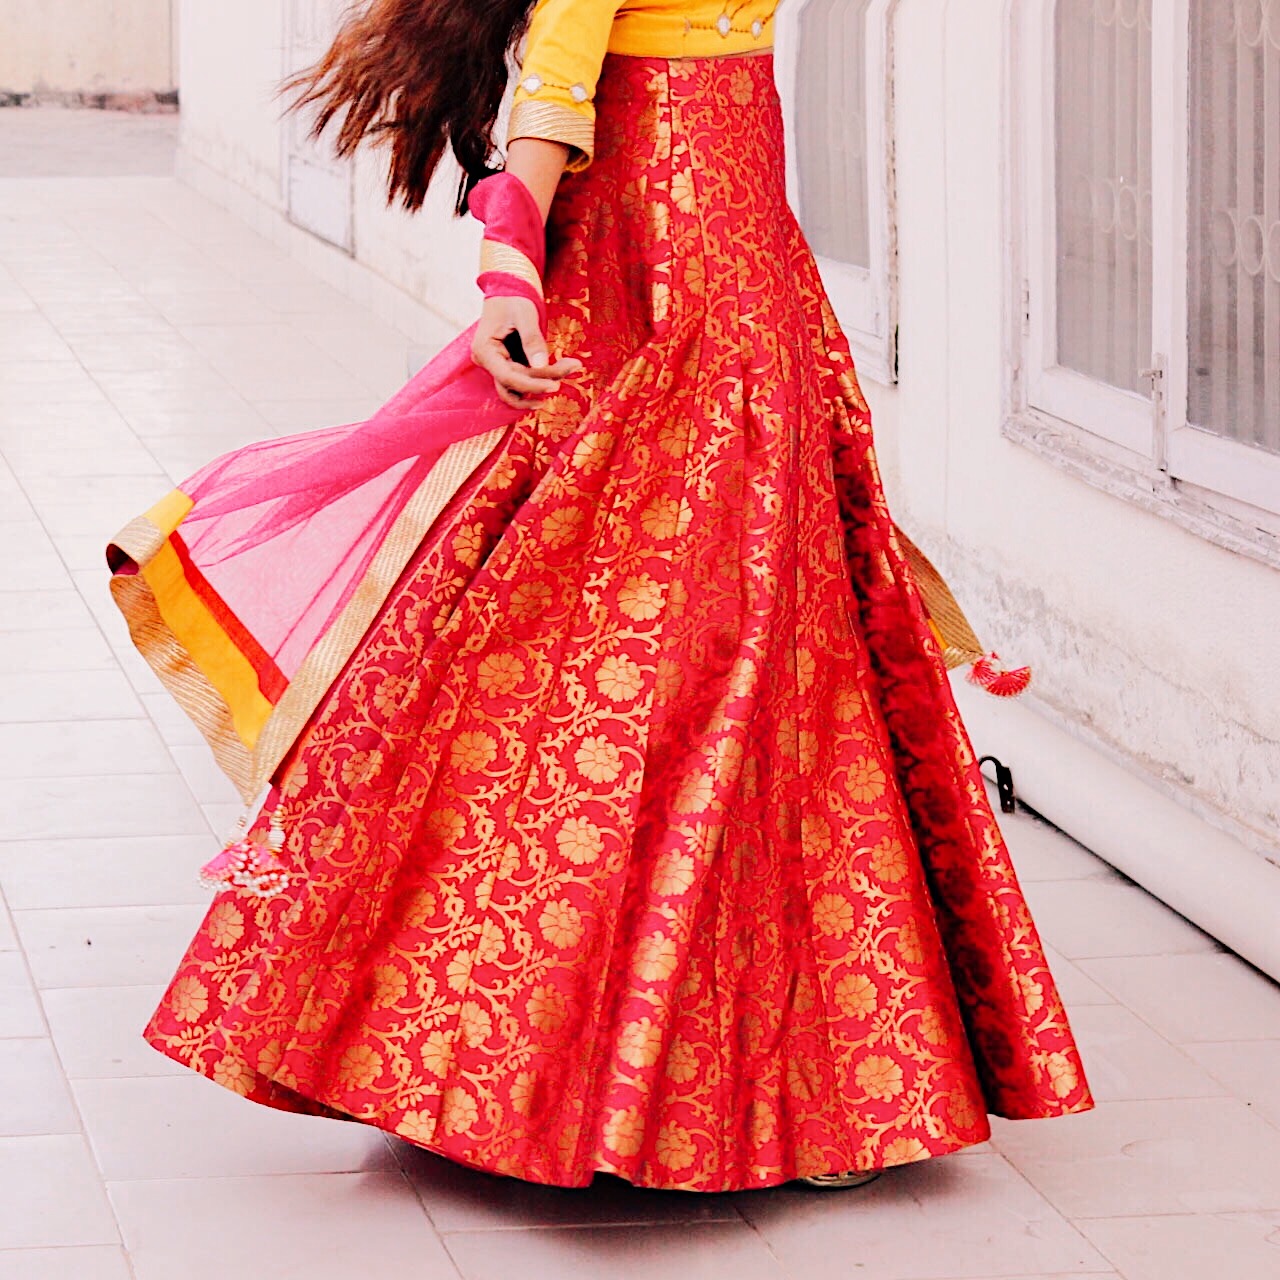 traditional indian, pink and yellow lehnga, indian bridal, trending indian, bridal 2017, traditional bridal, bridal asia 2017, benarsi, benarsi lehnga, mirror work, indian outfit, top indian blogger, uk blog, london blog, indian wedding outfit, traditional wedding outfit, wear to indian wedding, wear to indian celebration, indian embroidery, diwali, diwali outfit inspo, indian wedding outfit, hot pink lehnga, colour with hot pink, trending colours, trending indian outfit colours, missdesicouture, missdesicouture review, 